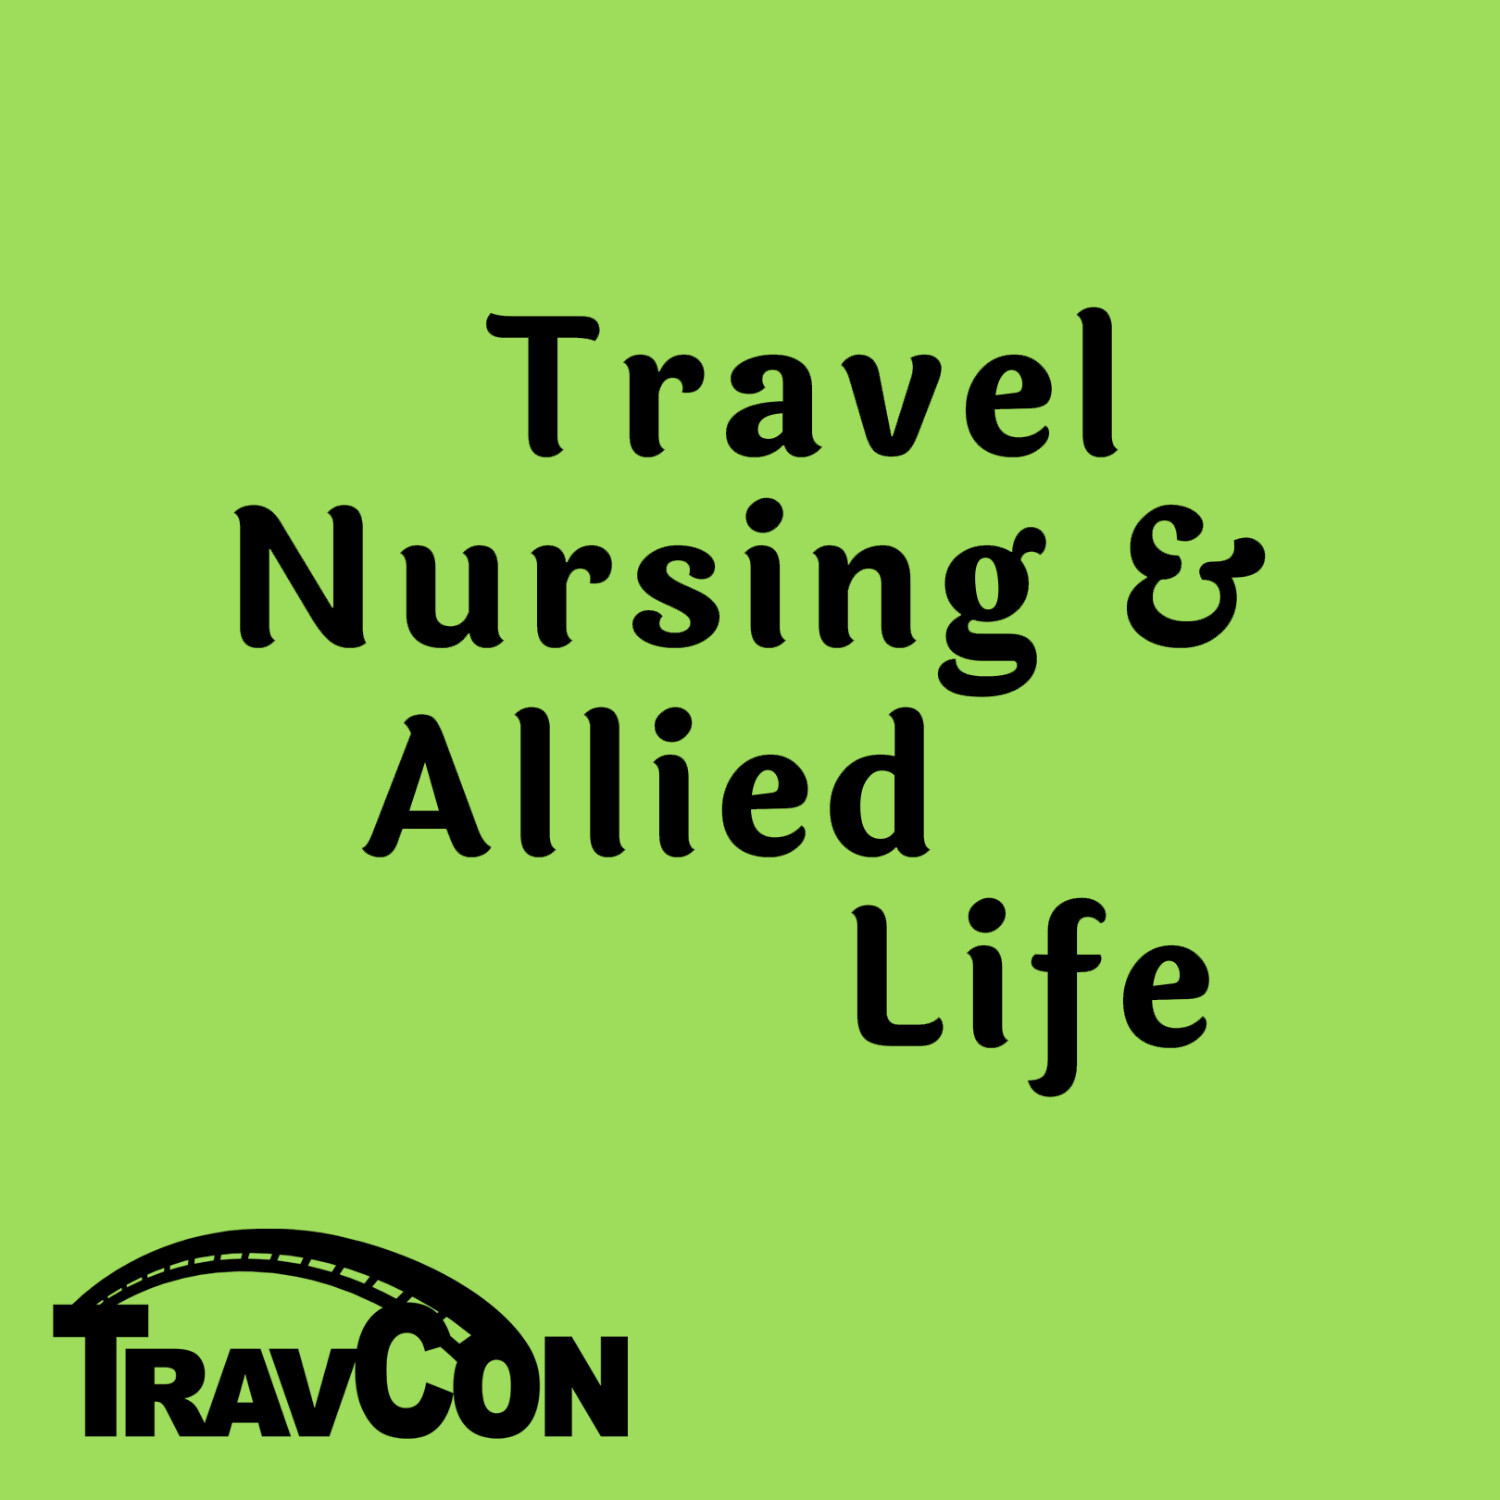 How to Prep for TravCon - TravCon: The Travelers Conference